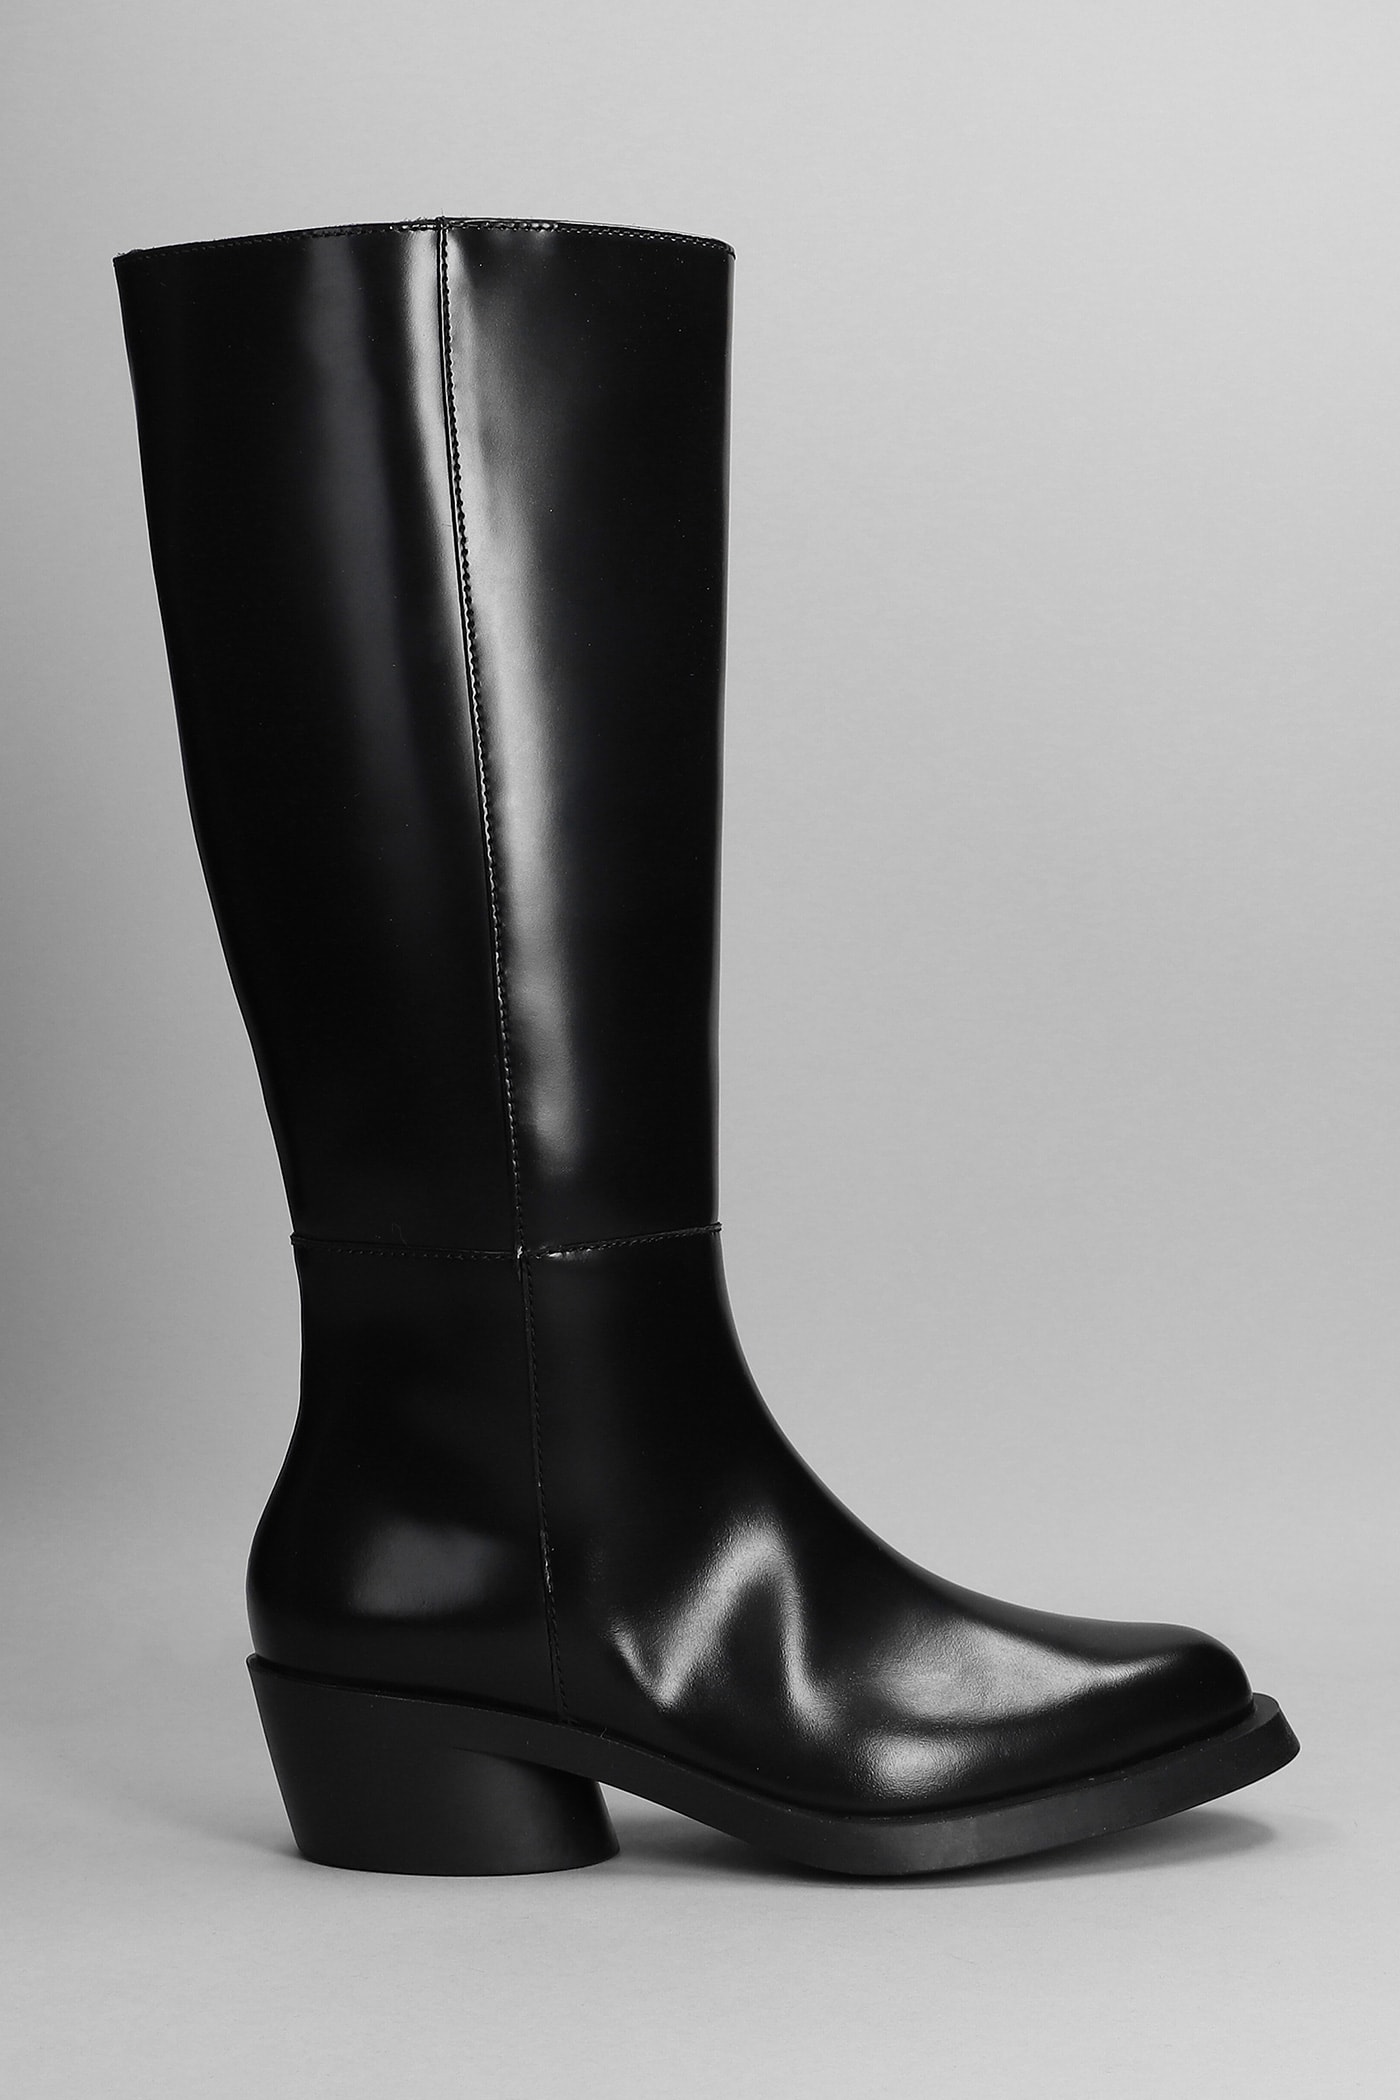 Camper Bonnie Texan Boots In Black Leather